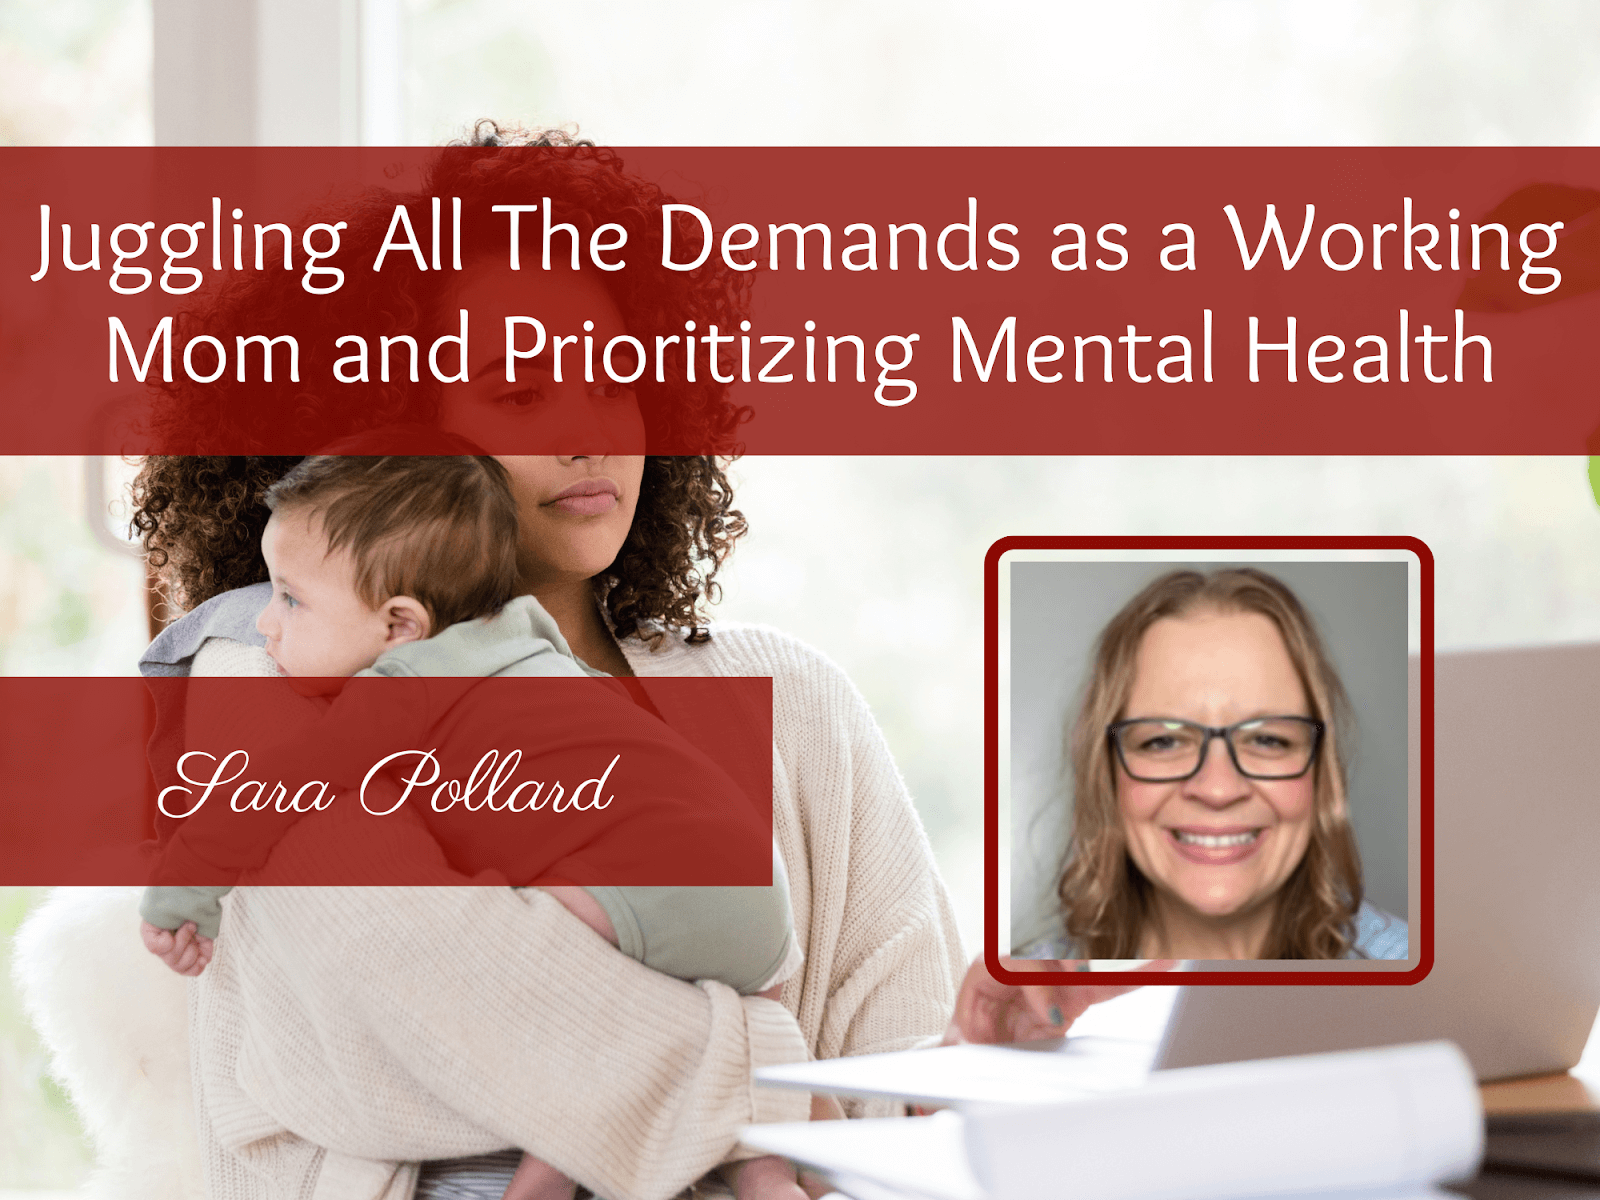 Juggling All The Demands as a Working Mom and Prioritizing Mental Health